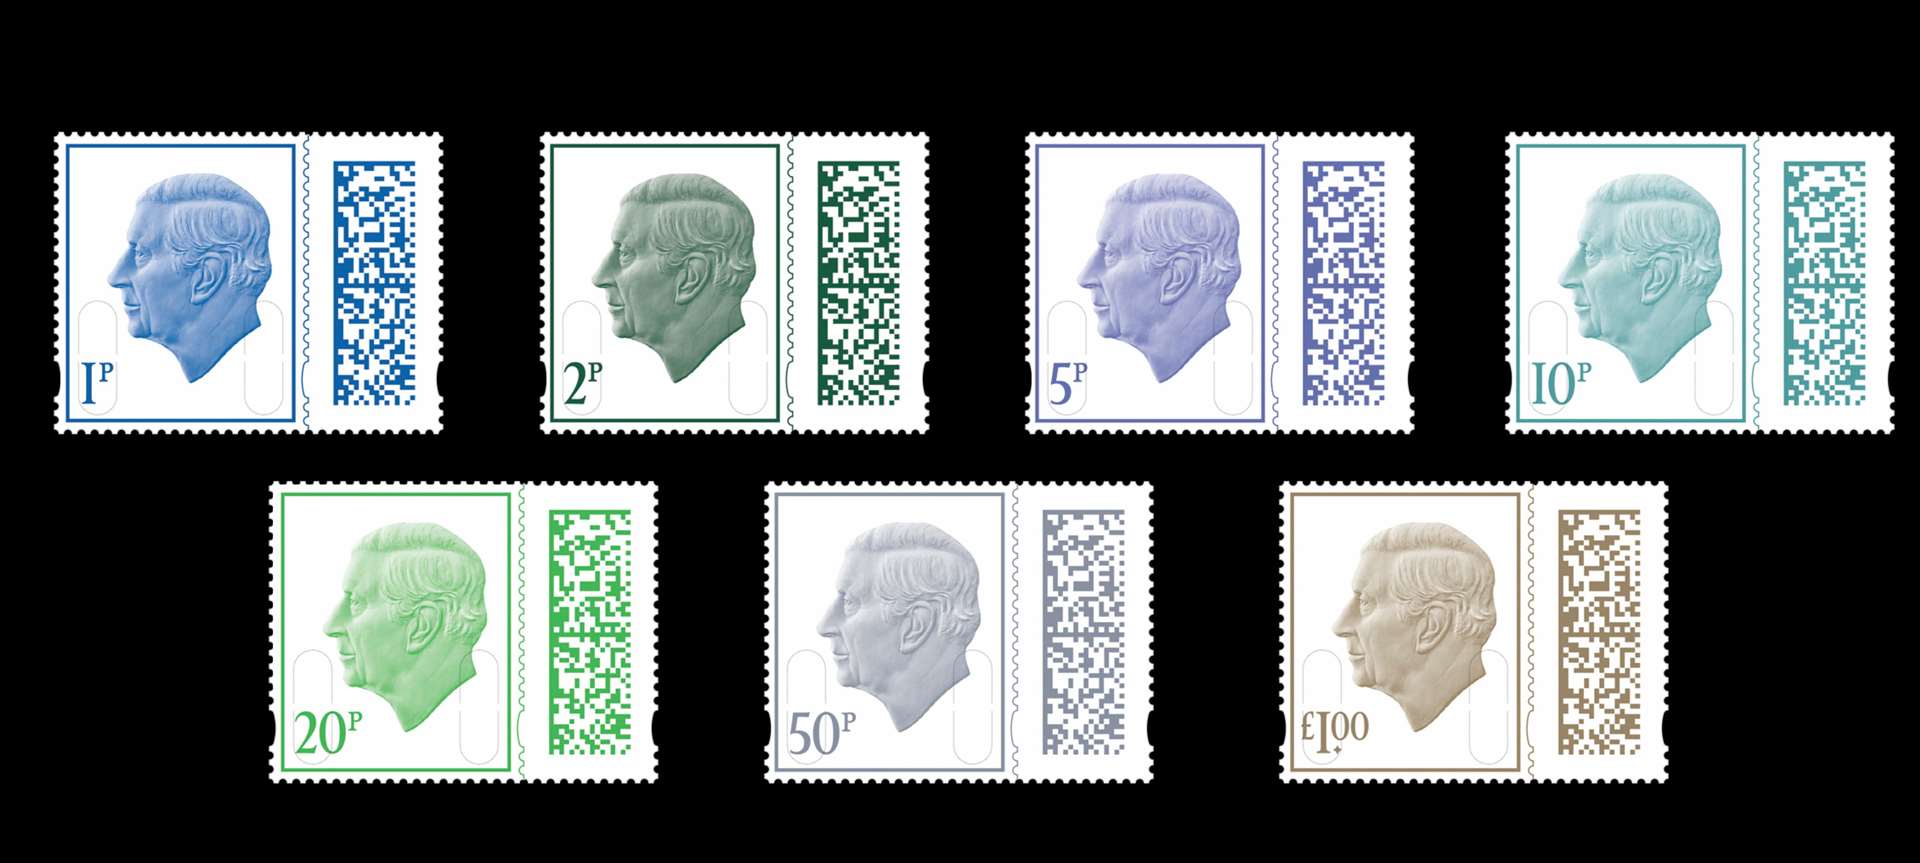 The stamps range in value from 1p to £5